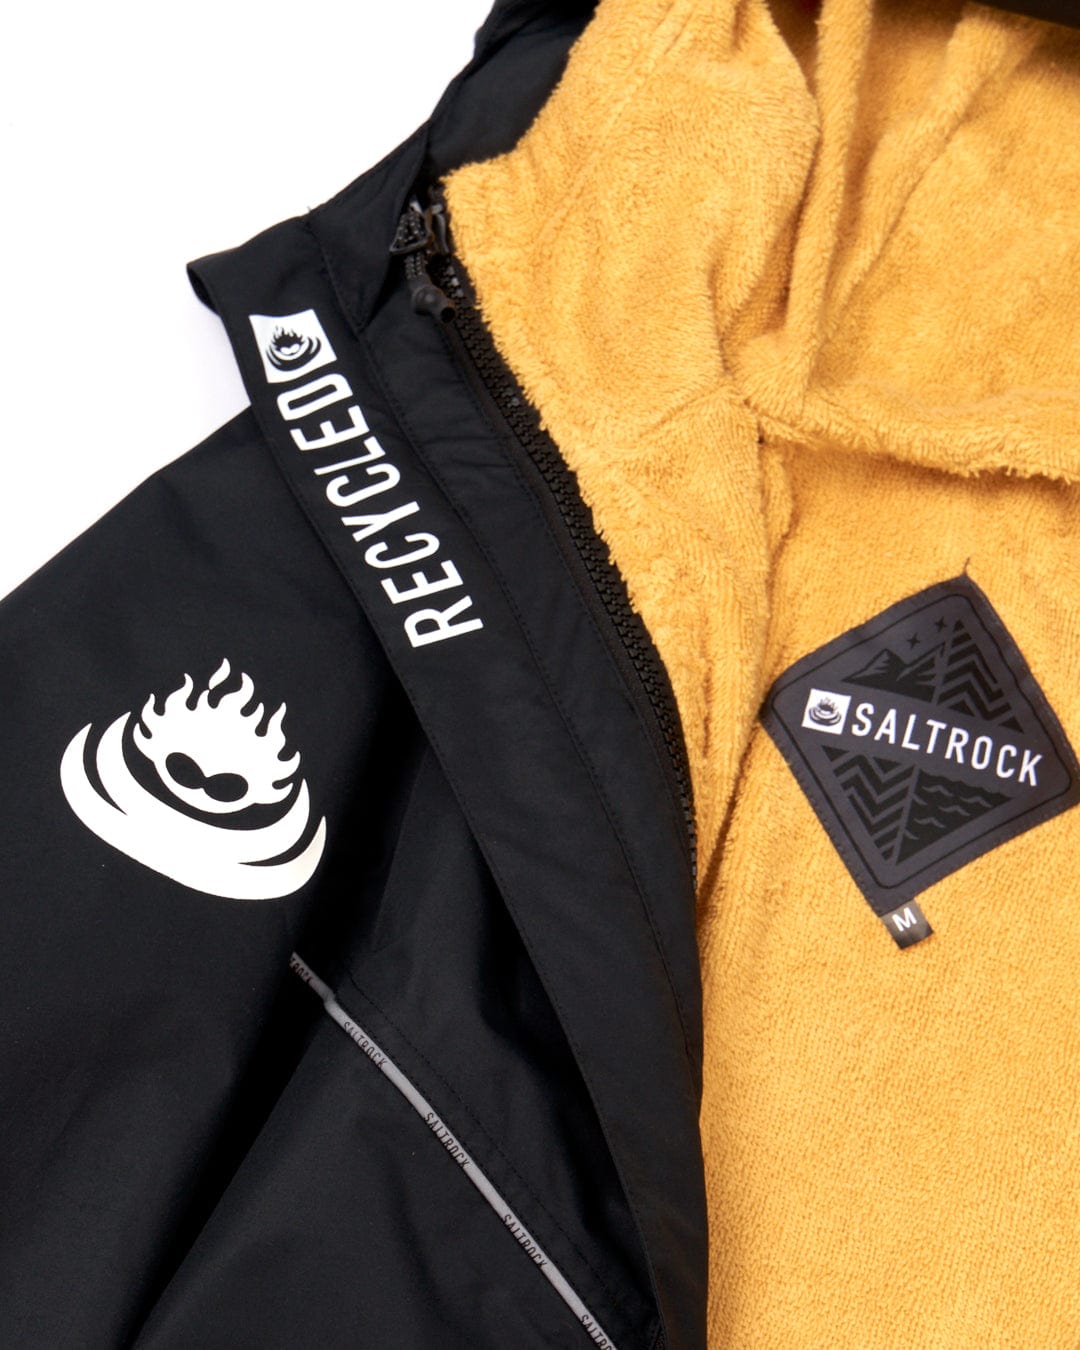 Close-up of a Saltrock black jacket with white "recycled material" text and logo next to a Saltrock yellow fleece garment with a "Saltrock" brand patch.